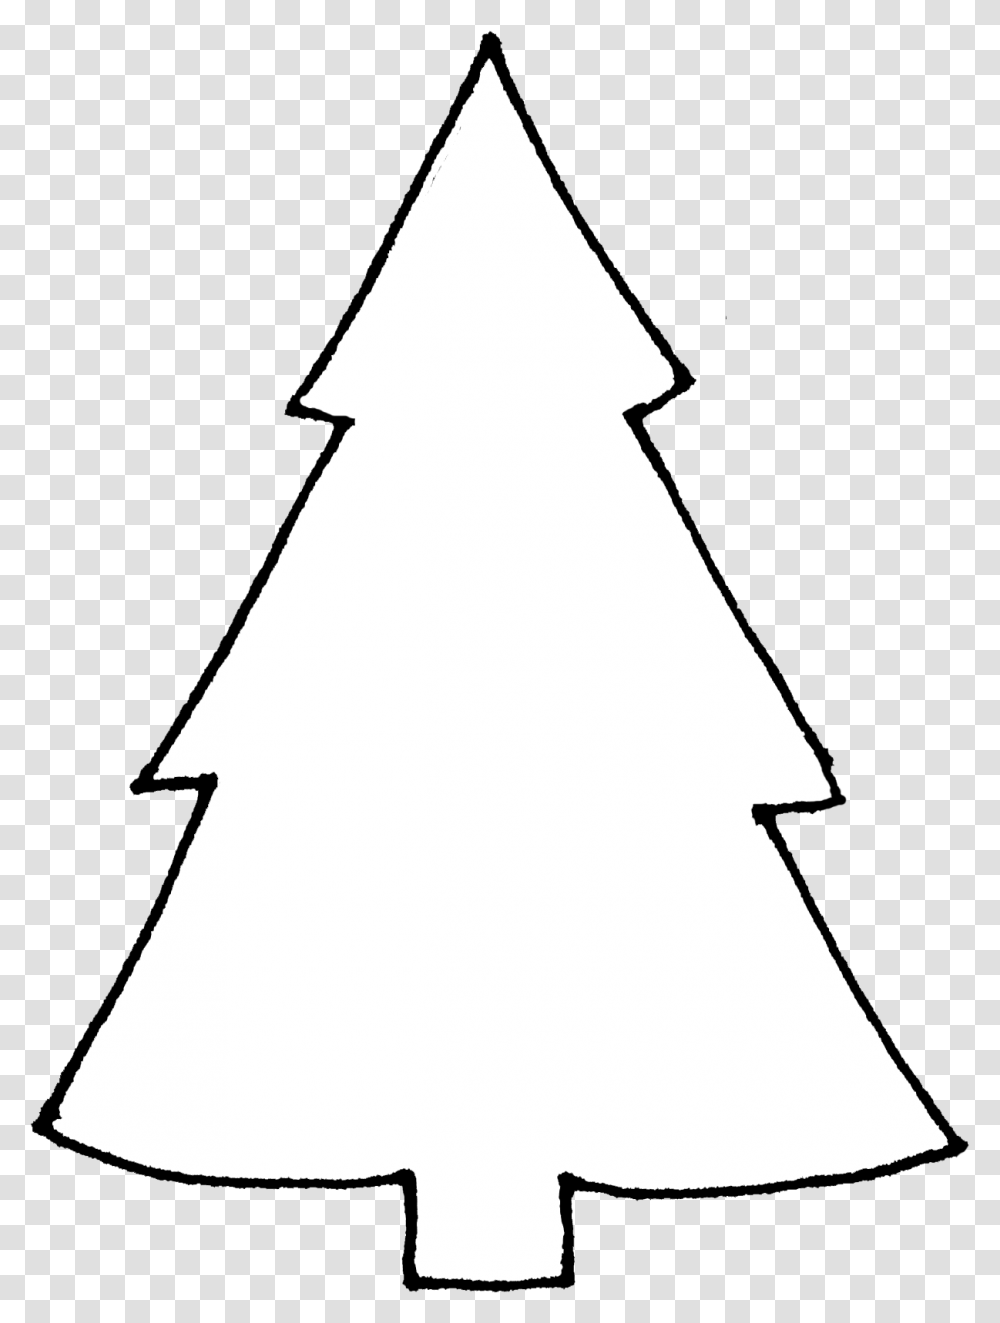 Download Outlines Christmas Tree Icon White Outline Full Christmas Tree, Clothing, Apparel, Triangle, Symbol Transparent Png